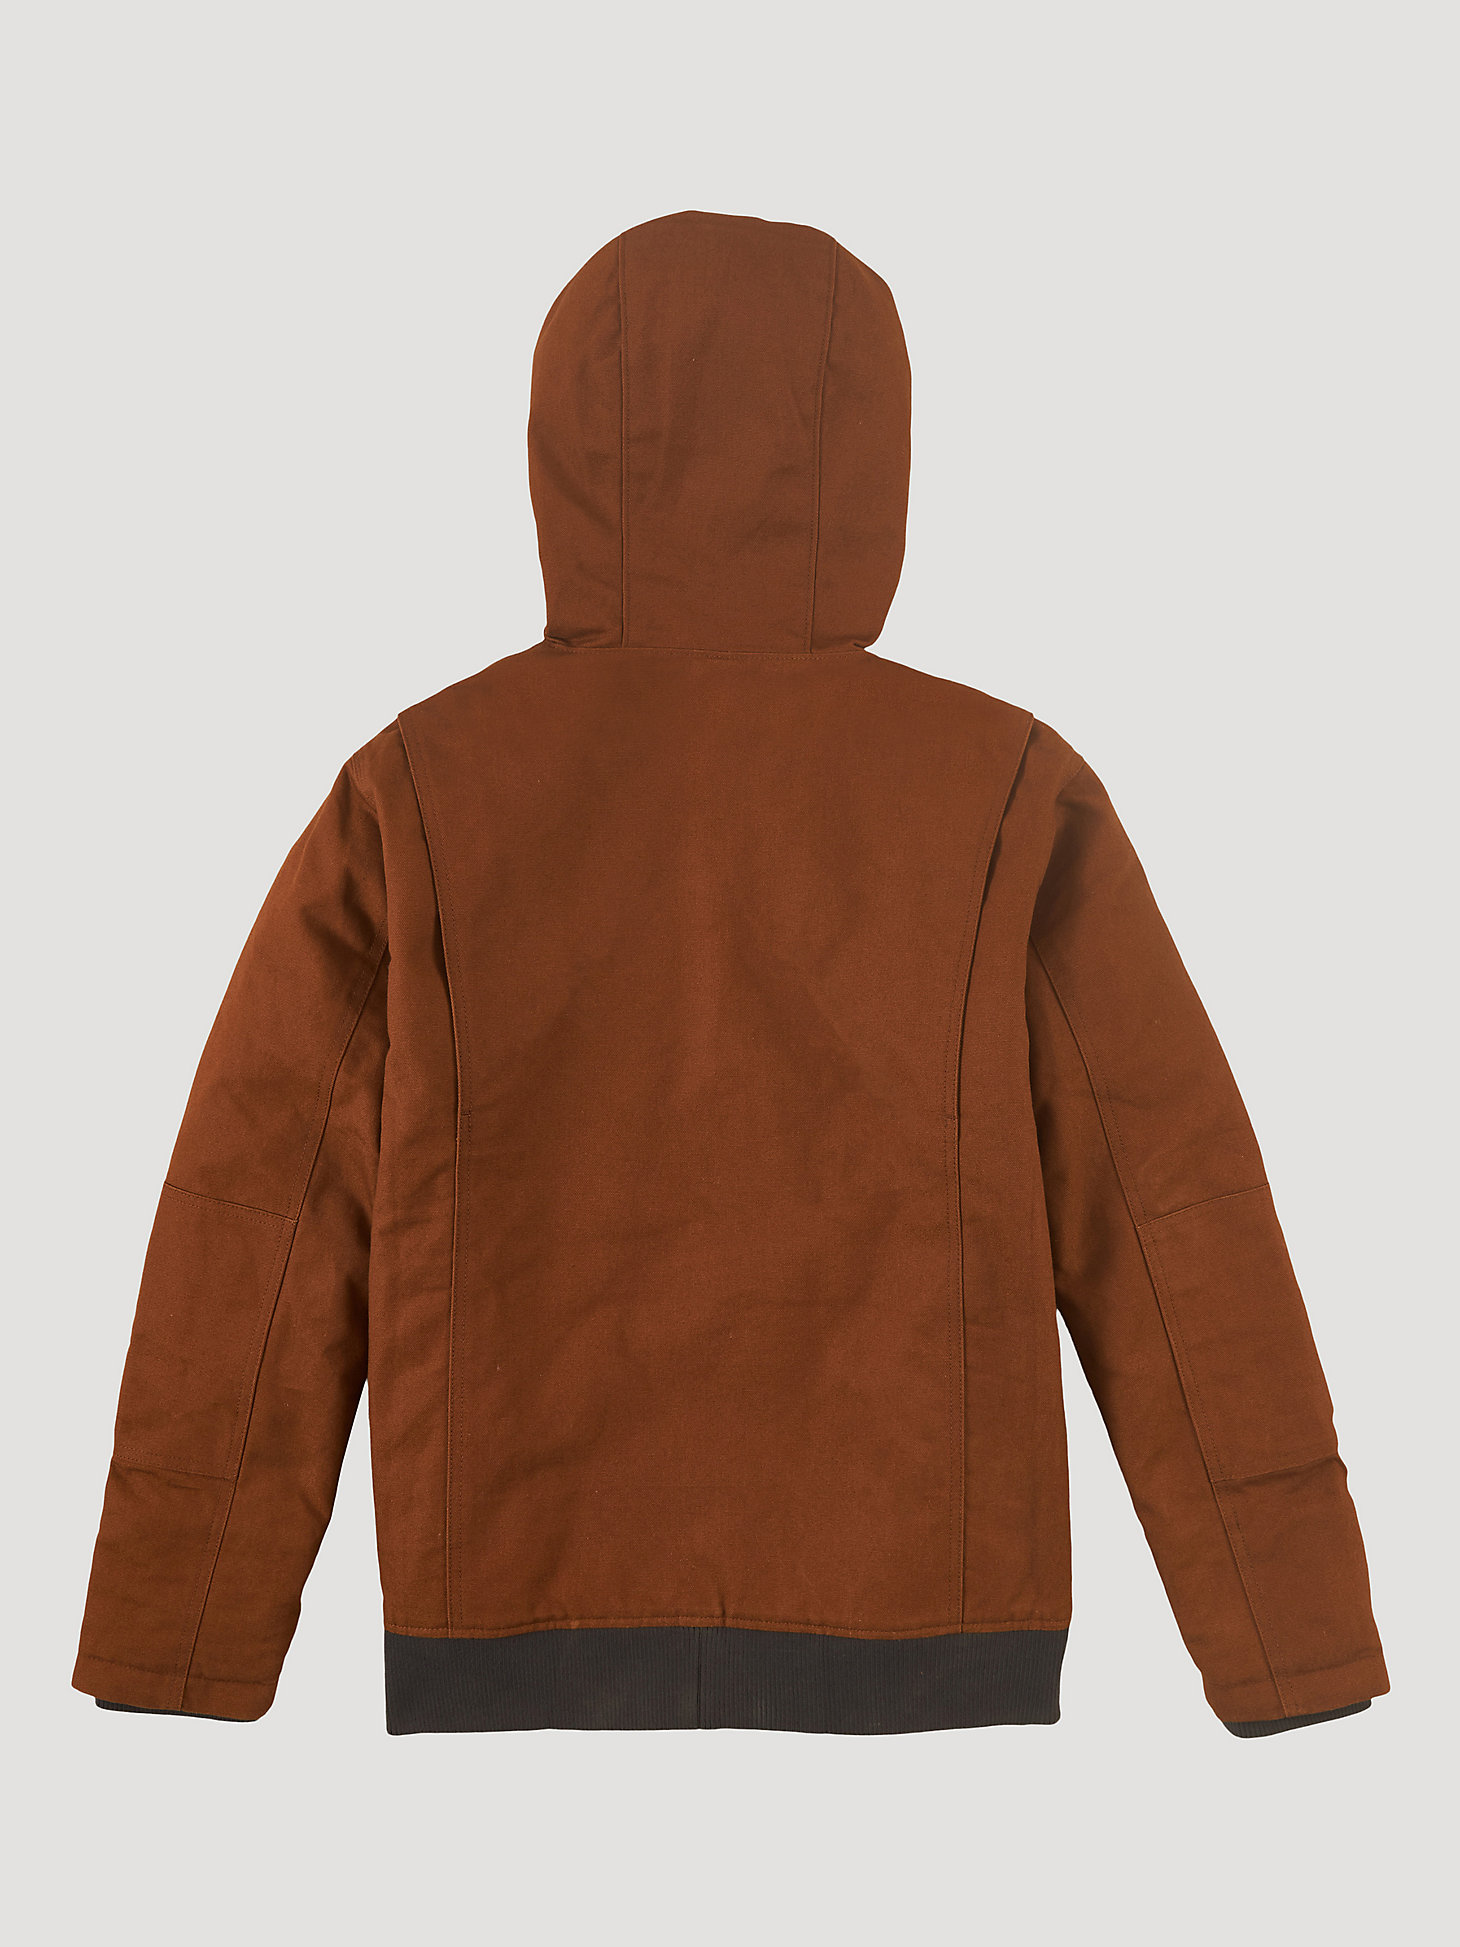 Wrangler® RIGGS Workwear® Tough Layers Insulated Canvas Work Jacket in Toffee alternative view 7